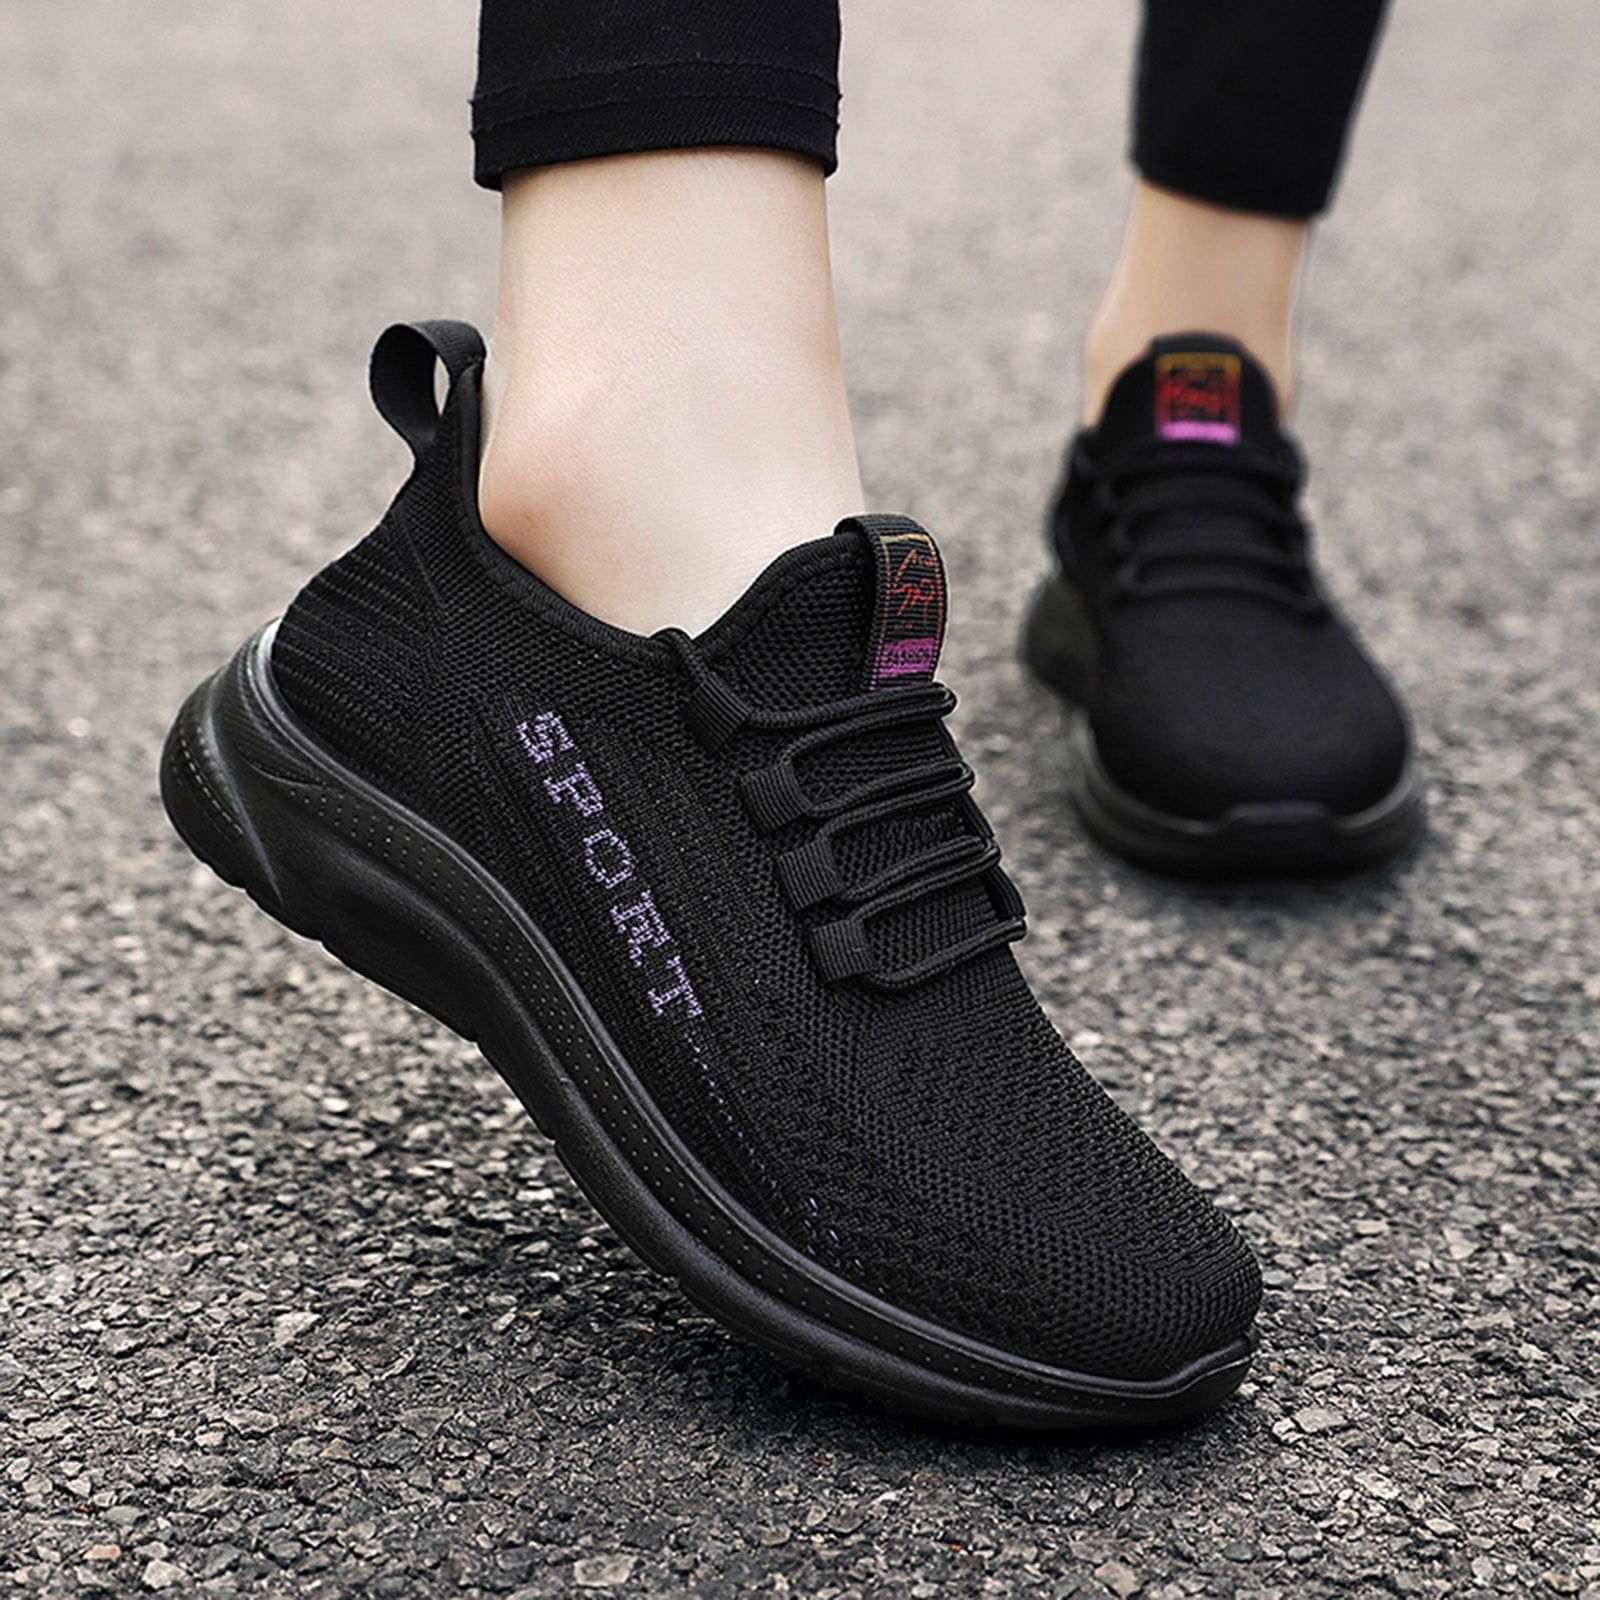  Mens Running Shoes Blade Sneakers Mesh Breathable Lightweight  Tennis Walking Gym Shoes for Men Black 7